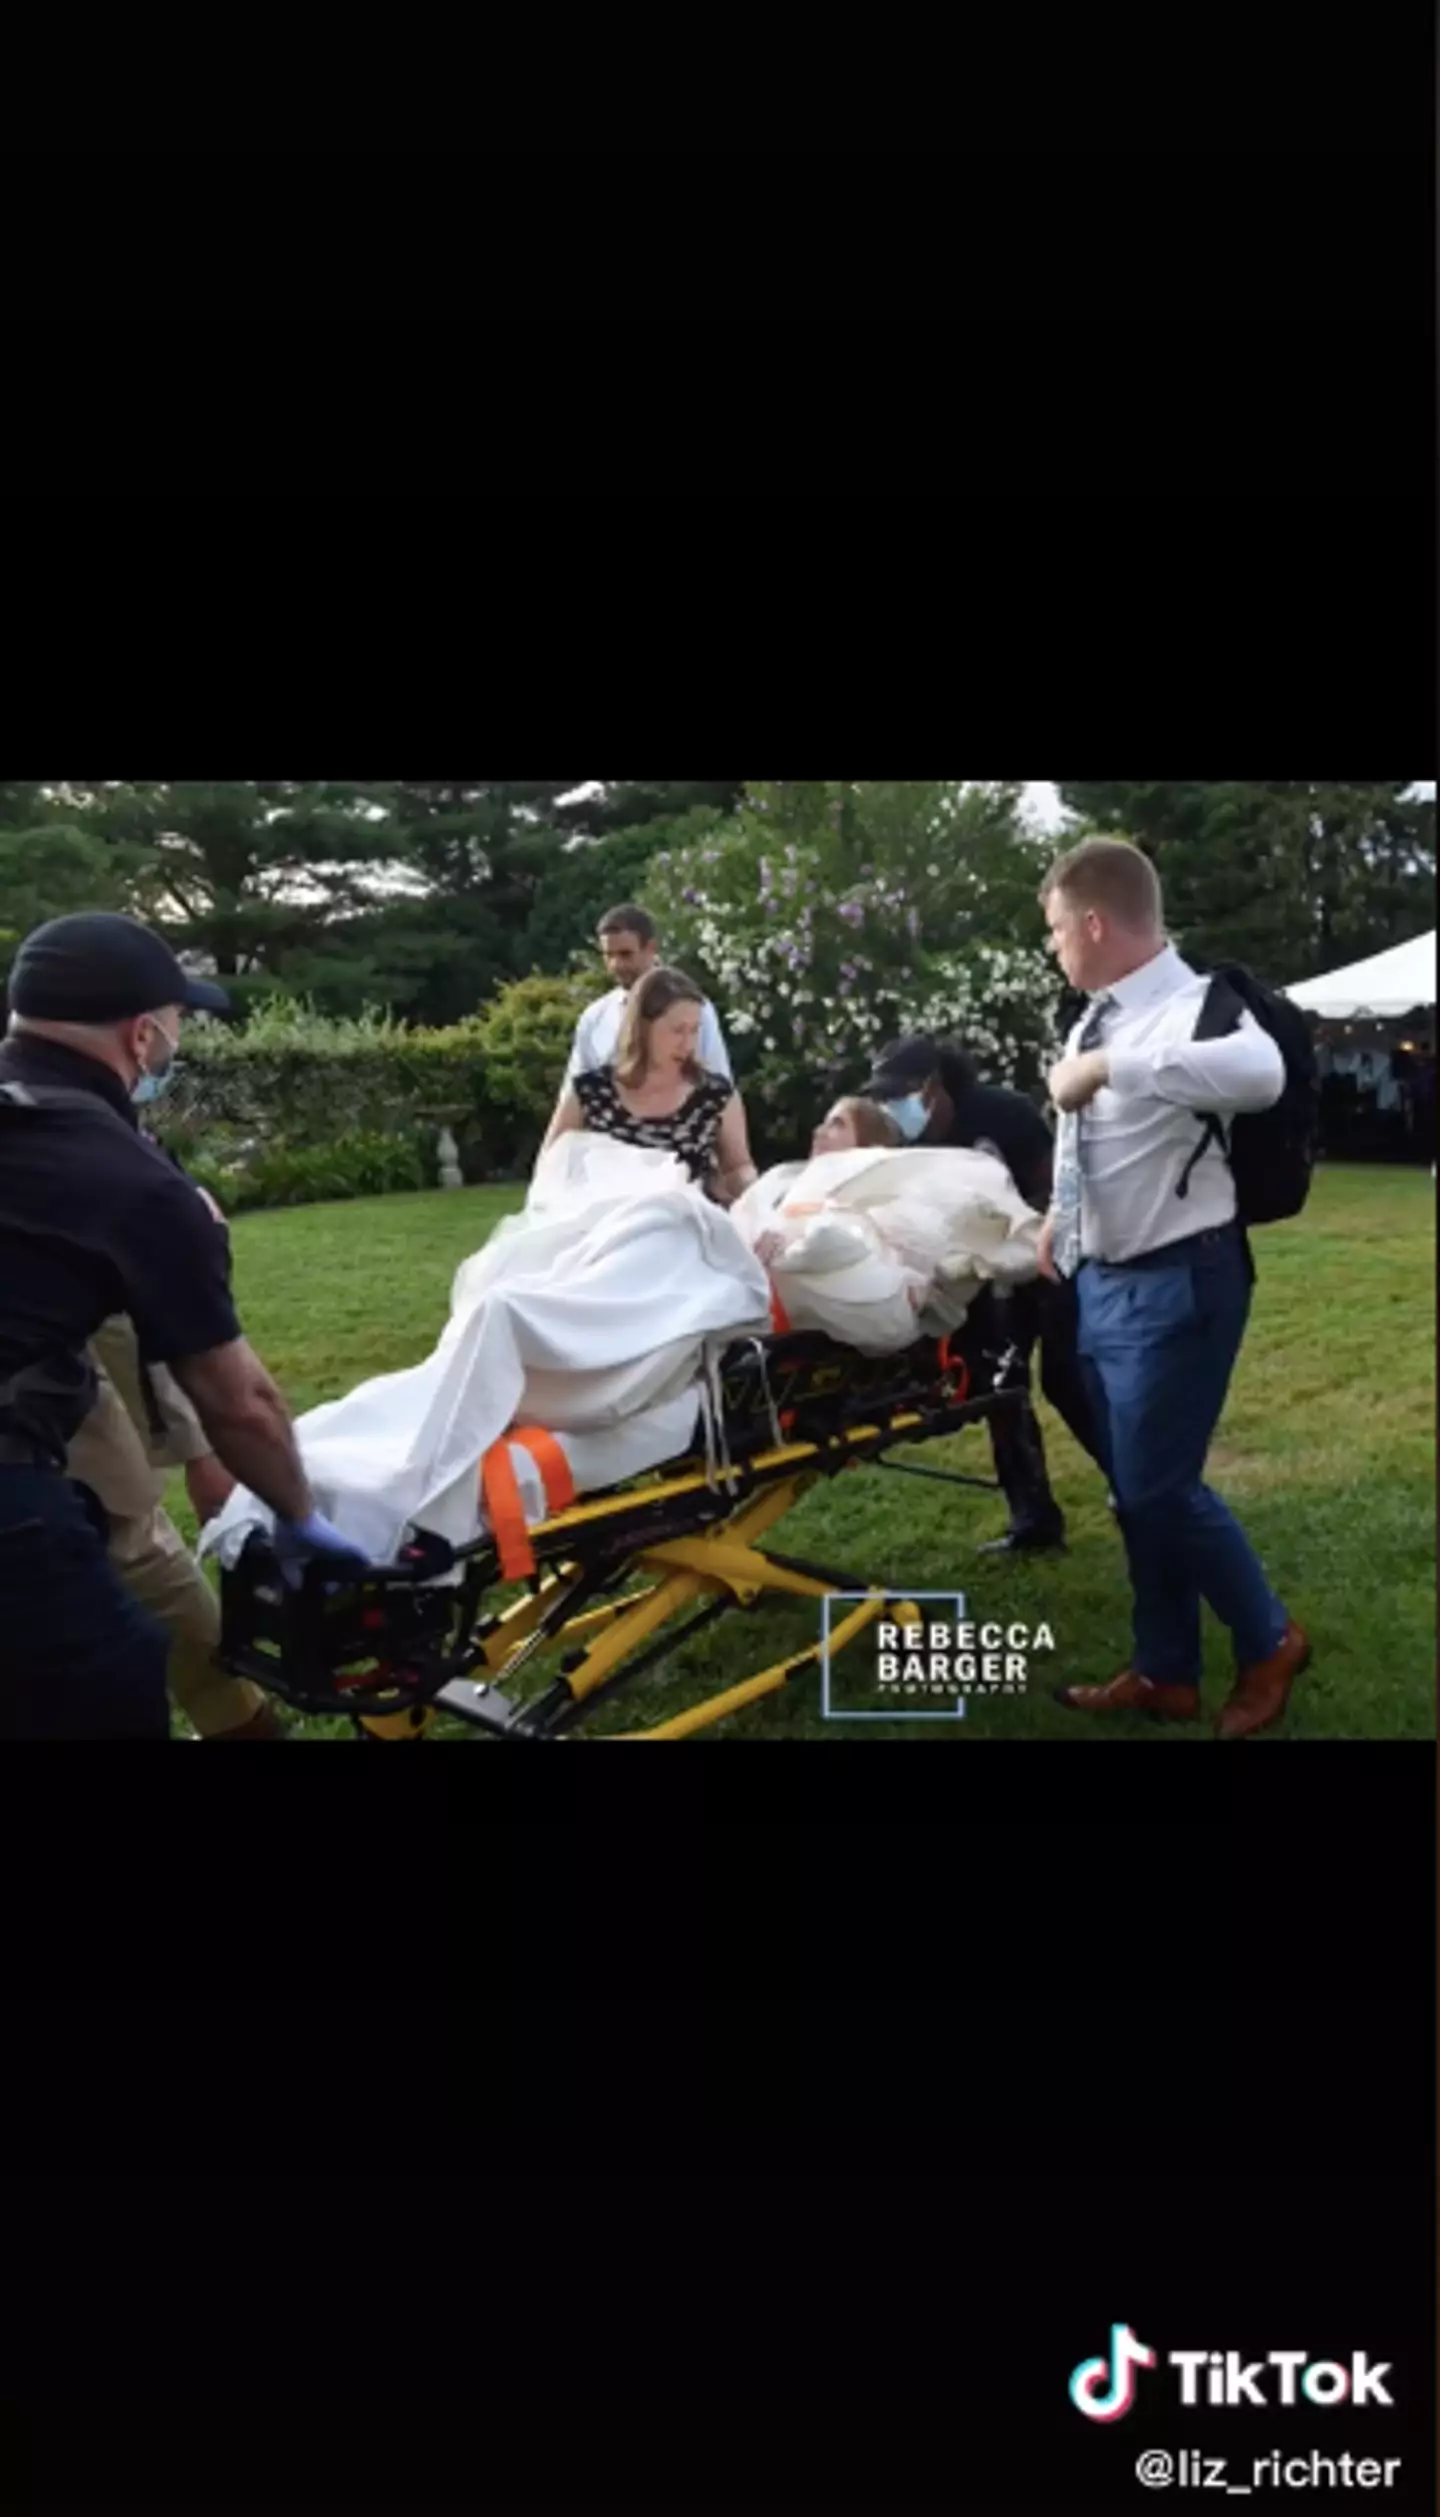 The bride was put on a stretcher (